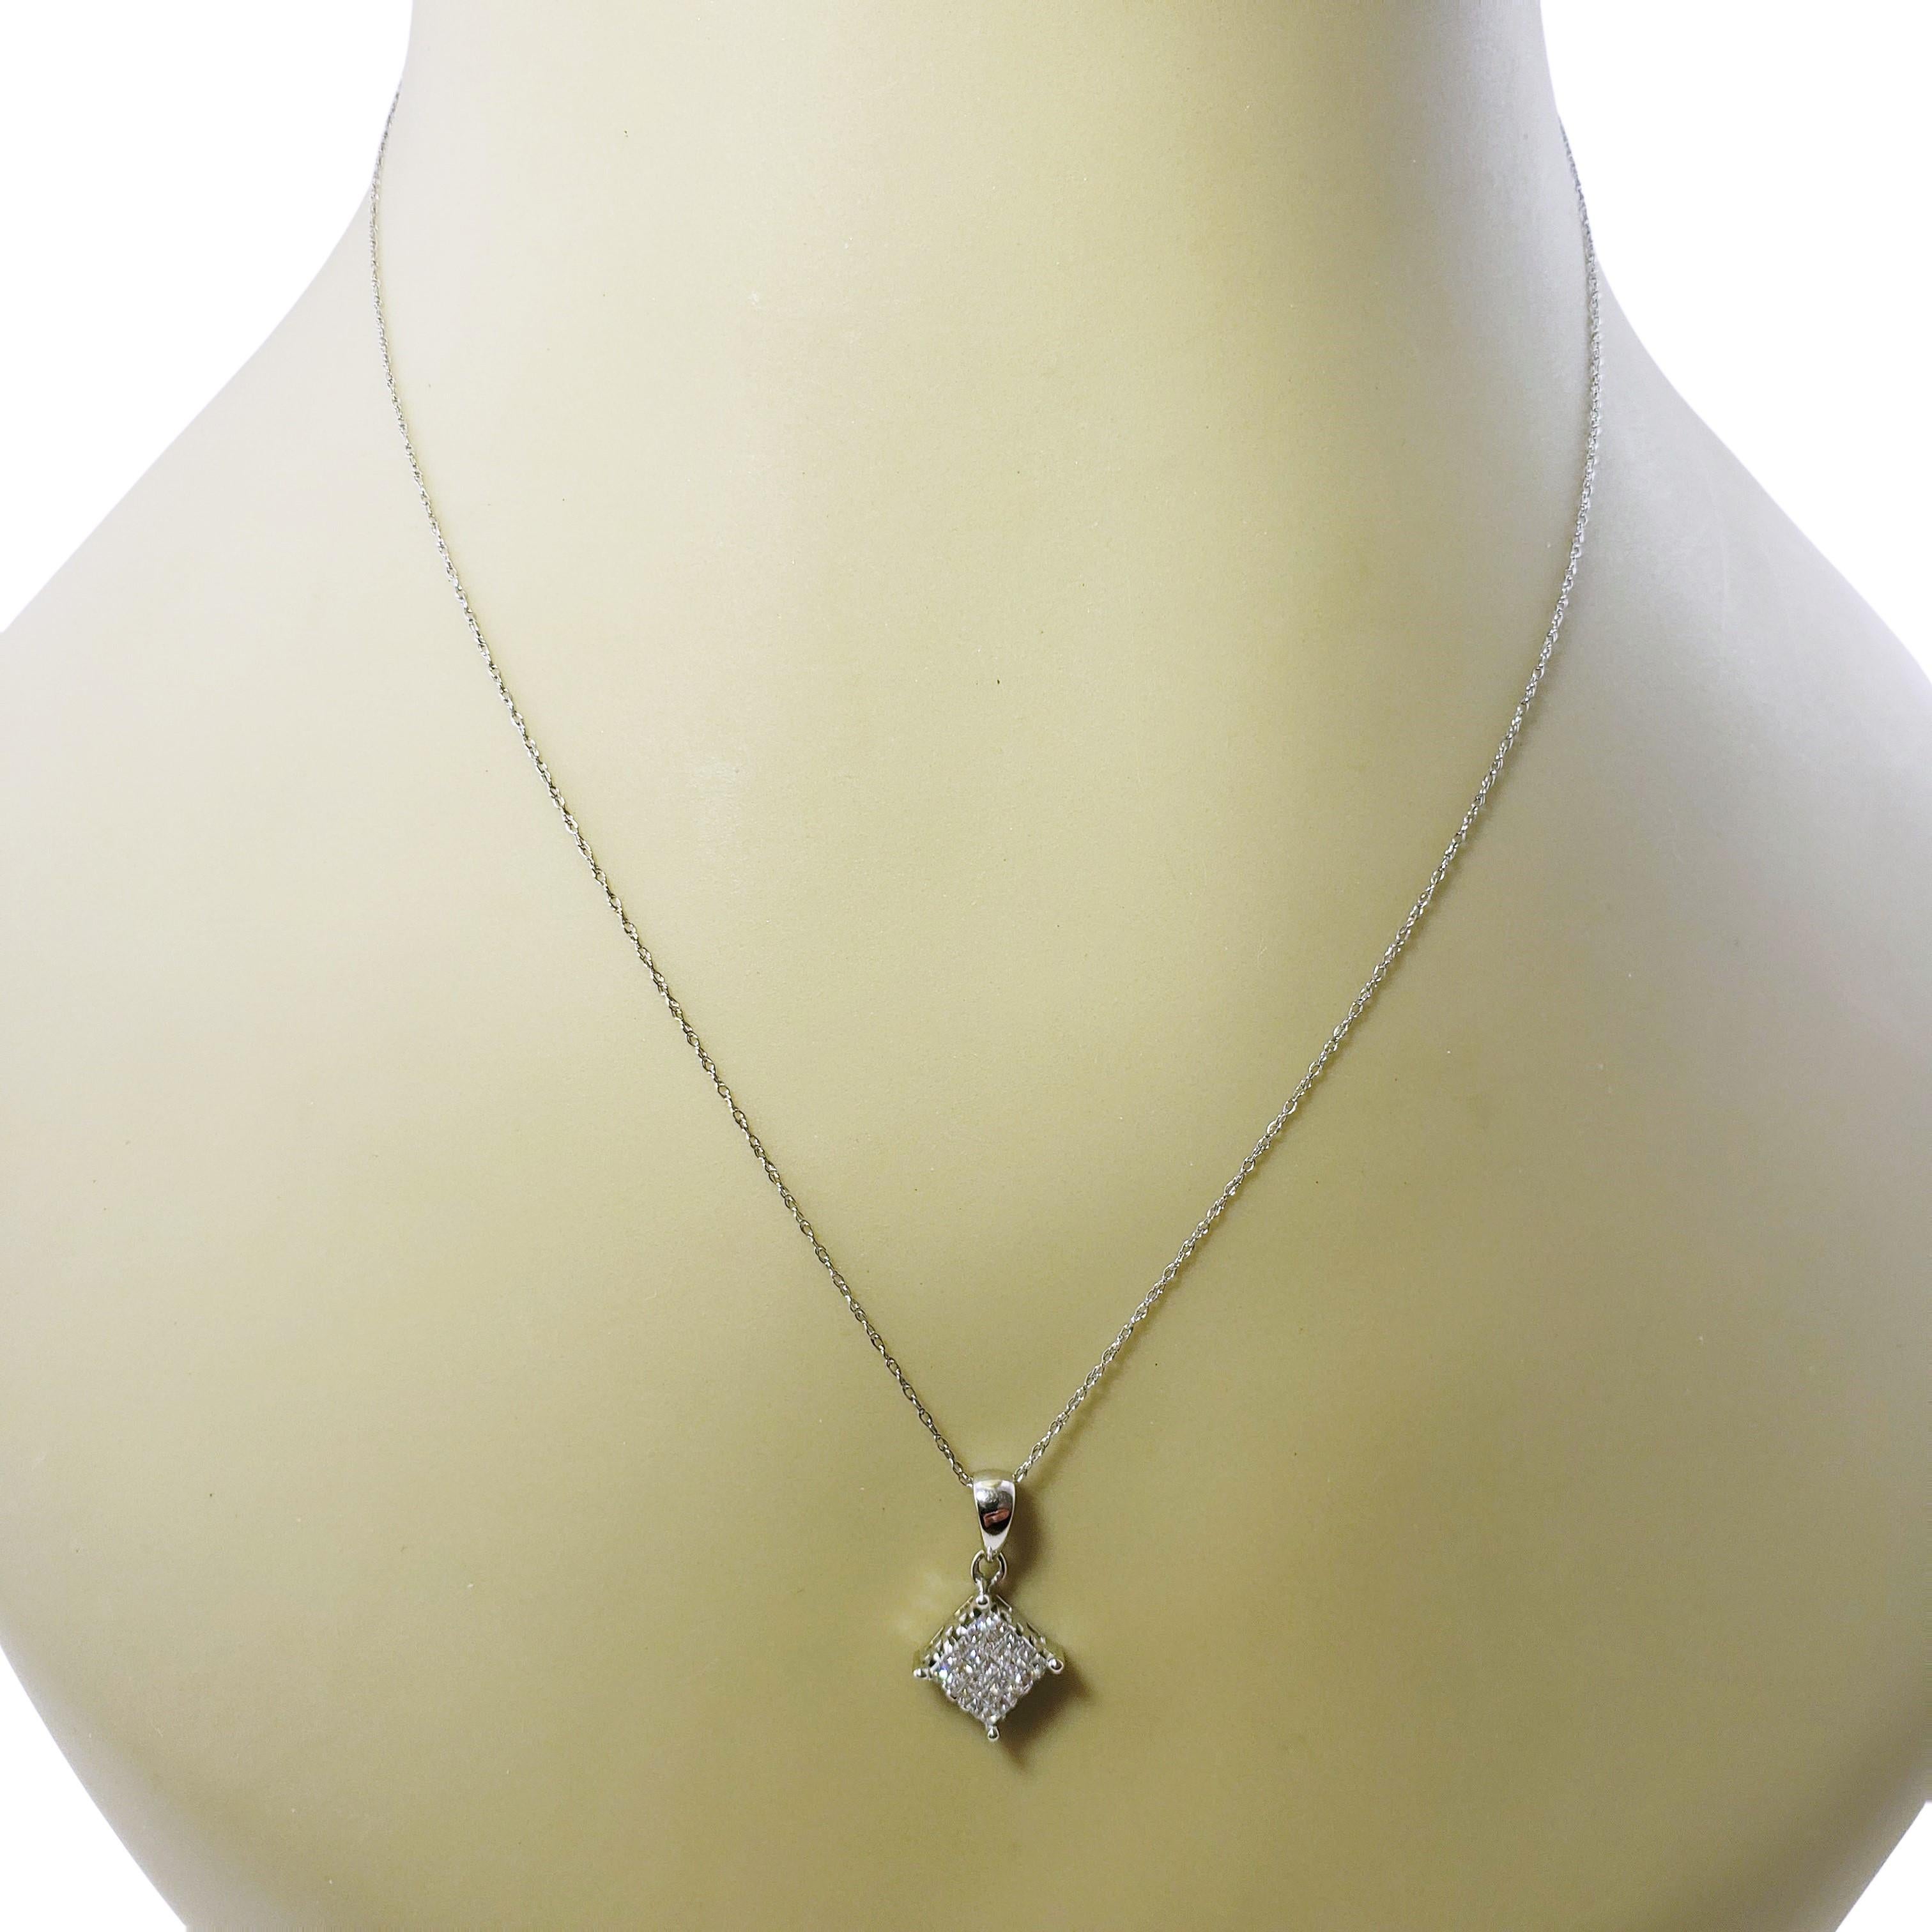 10 Karat White Gold and Diamond Pendant Necklace For Sale 2